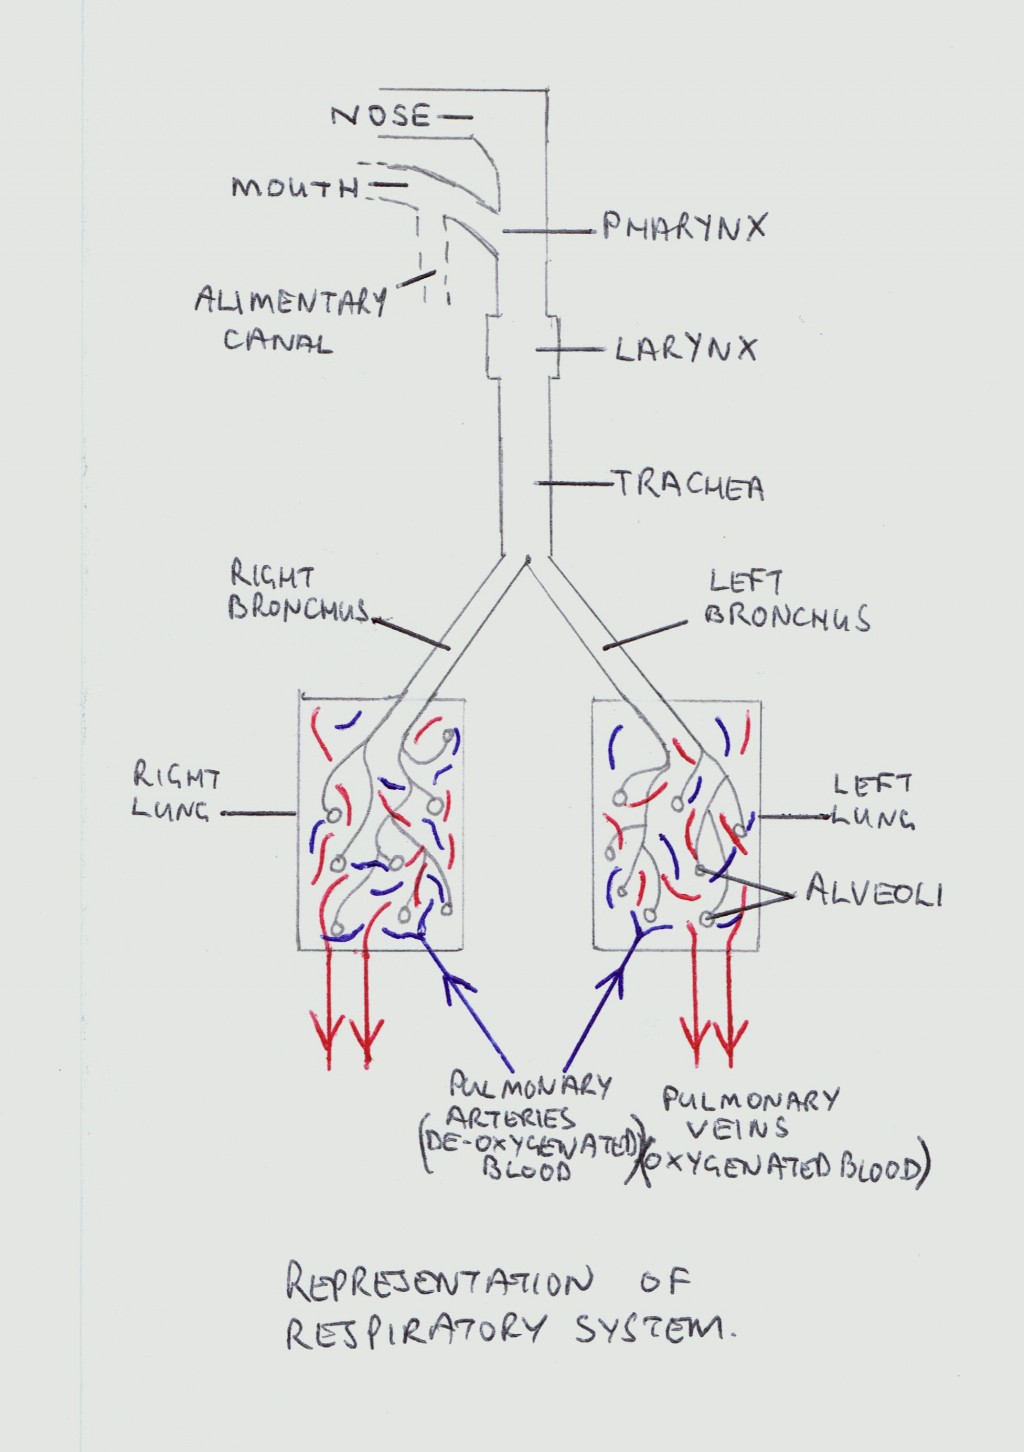 Lungs - The Respiratory System | HubPages